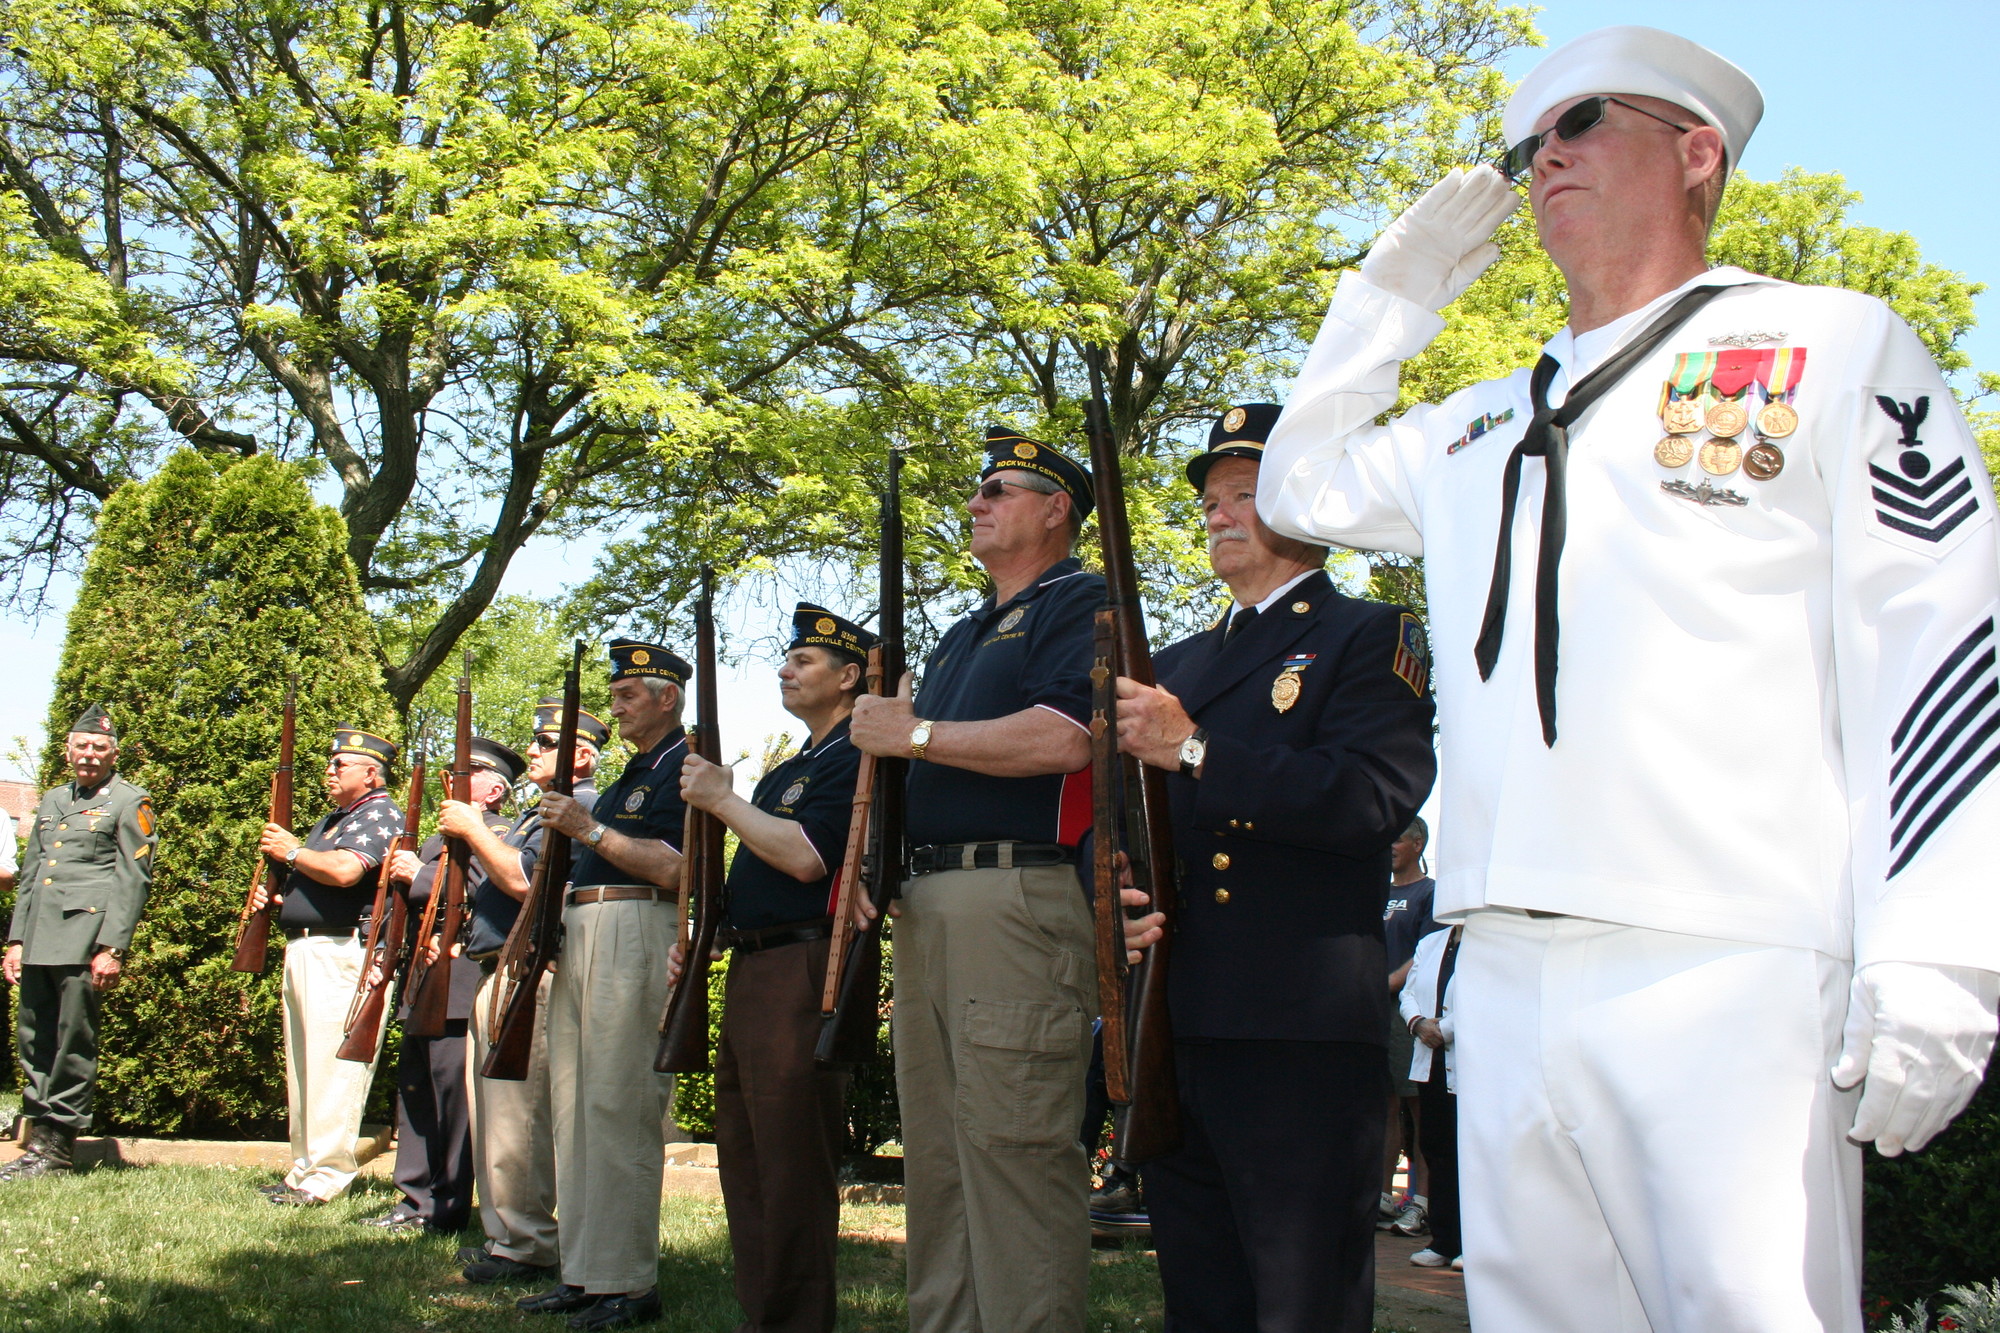 Local veterans led a 21-gun salute in honor of soldiers from Rockville Centre who perished while fighting in our nation’s wars.